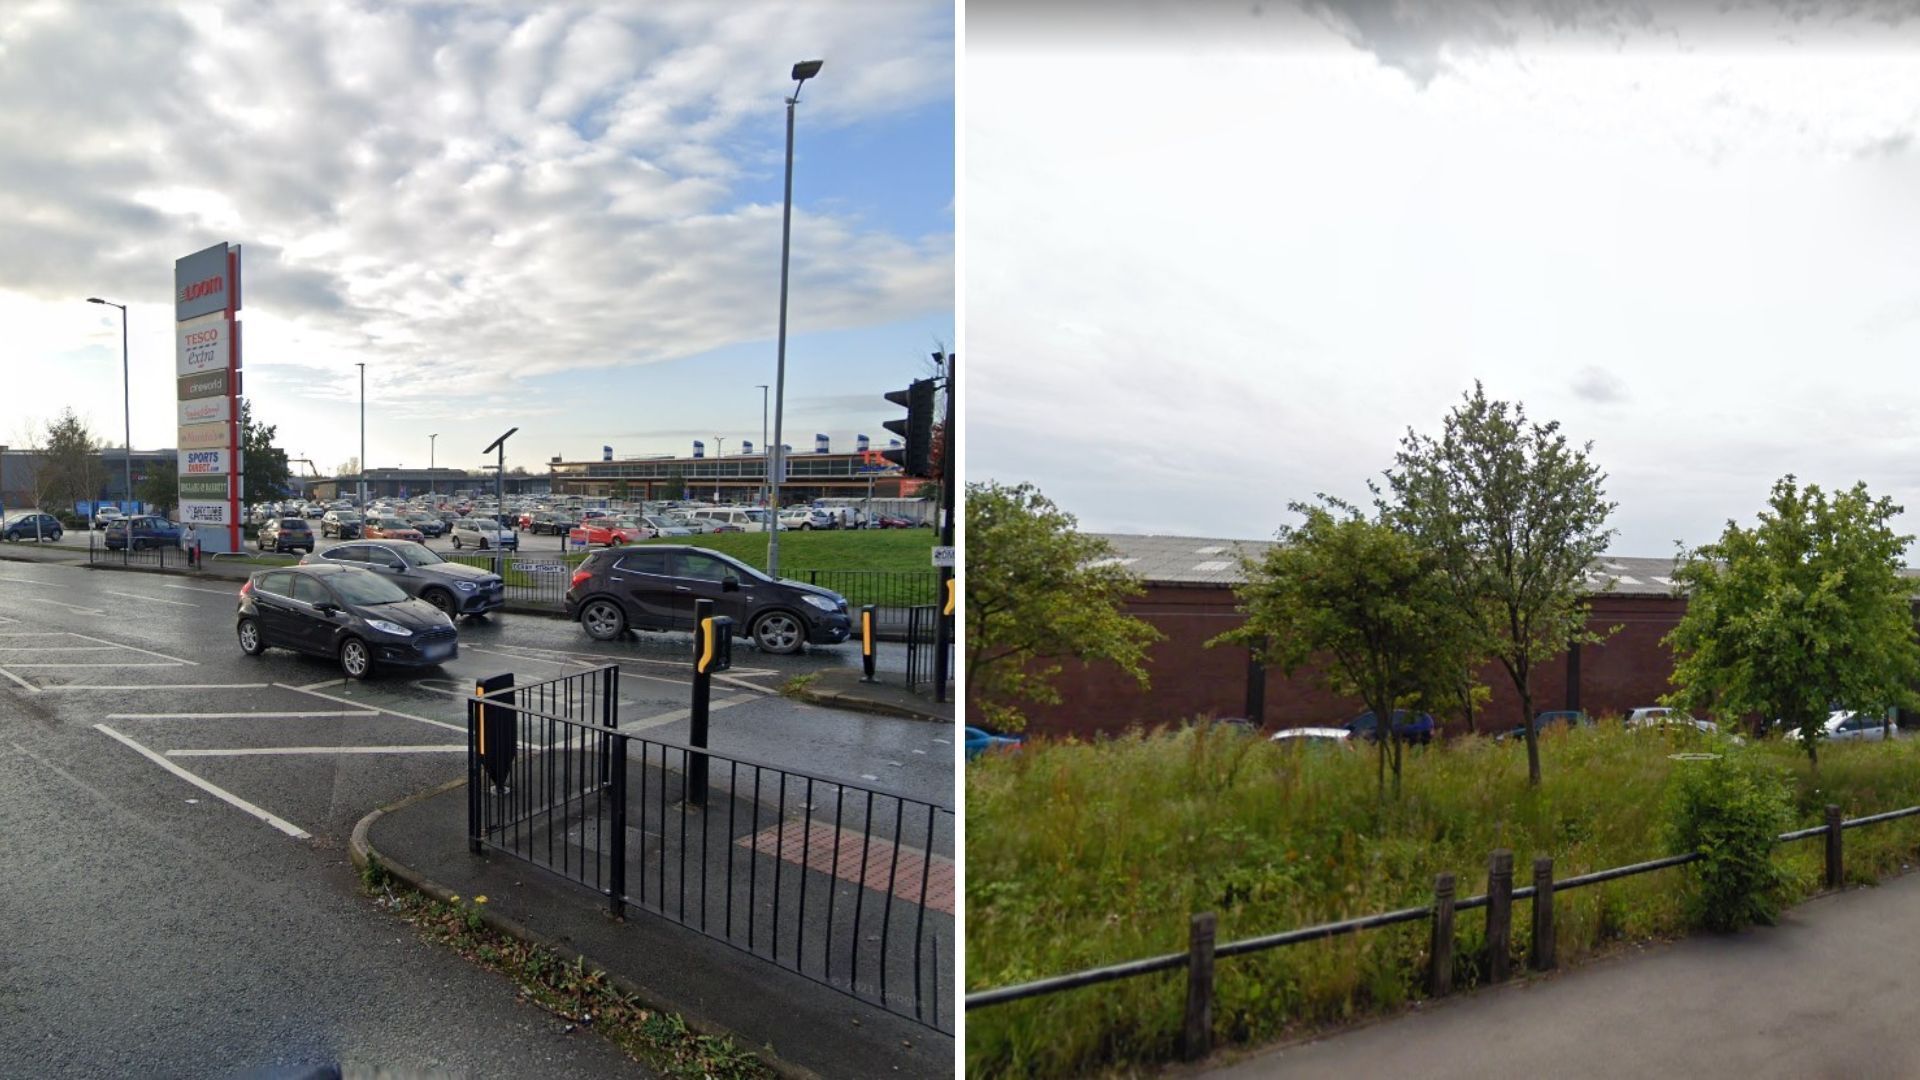 The Loom retail park in Leigh town centre compared between 2009 and 2020.